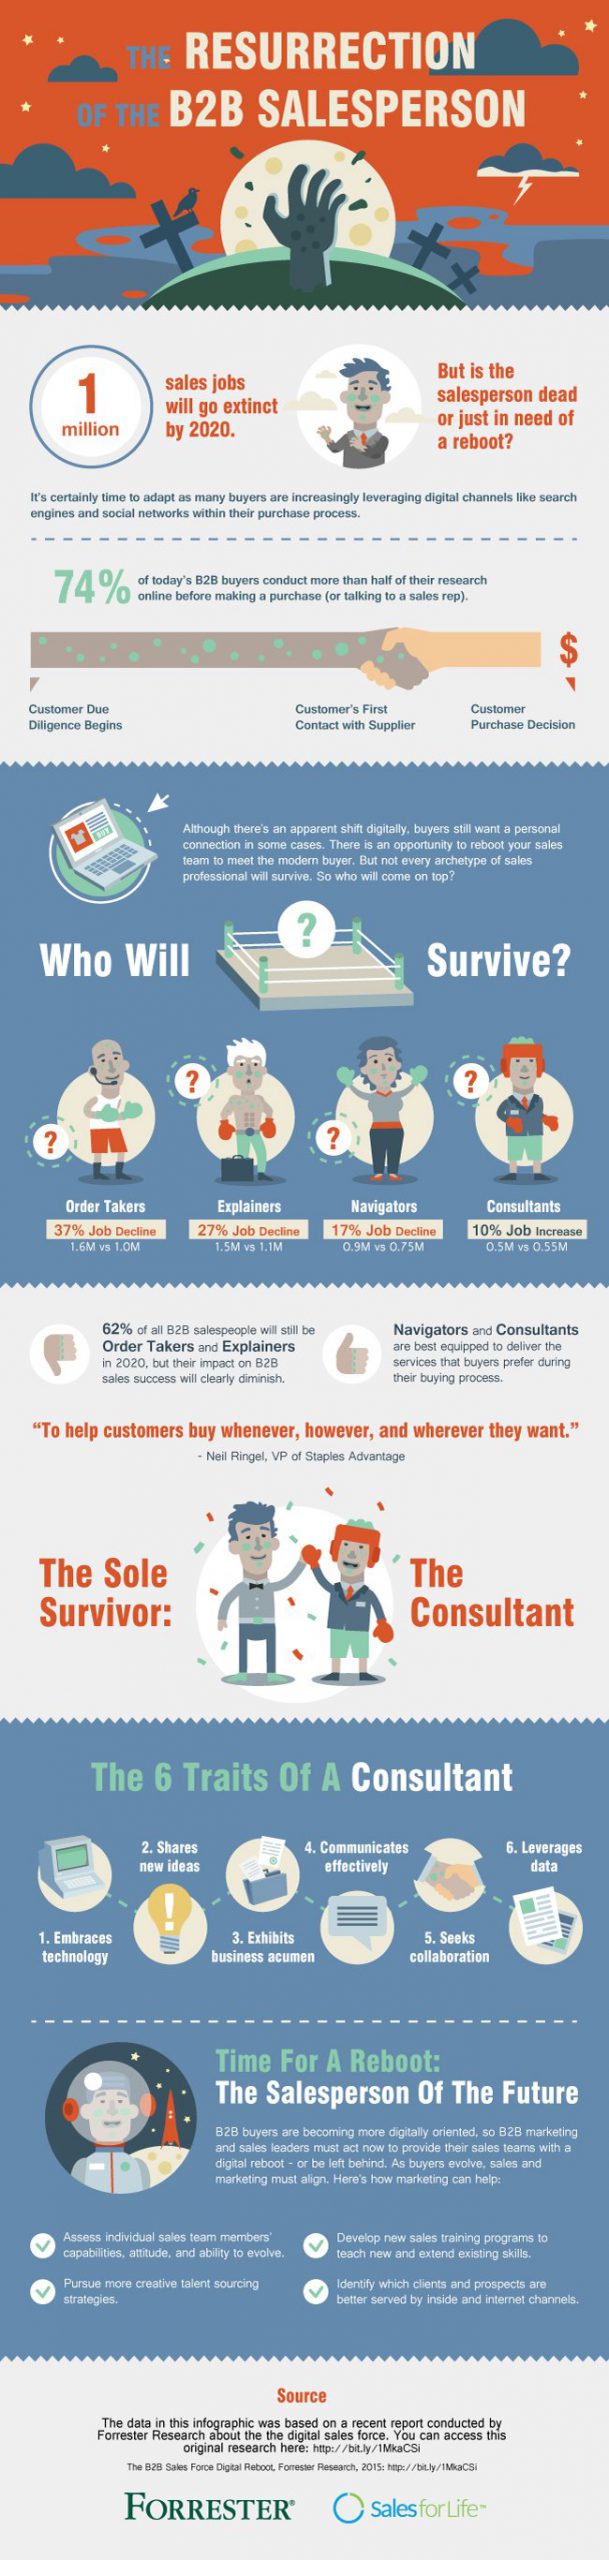 The-Resurrection-Of-The-B2B-Salesperson-Infographic-Forrester